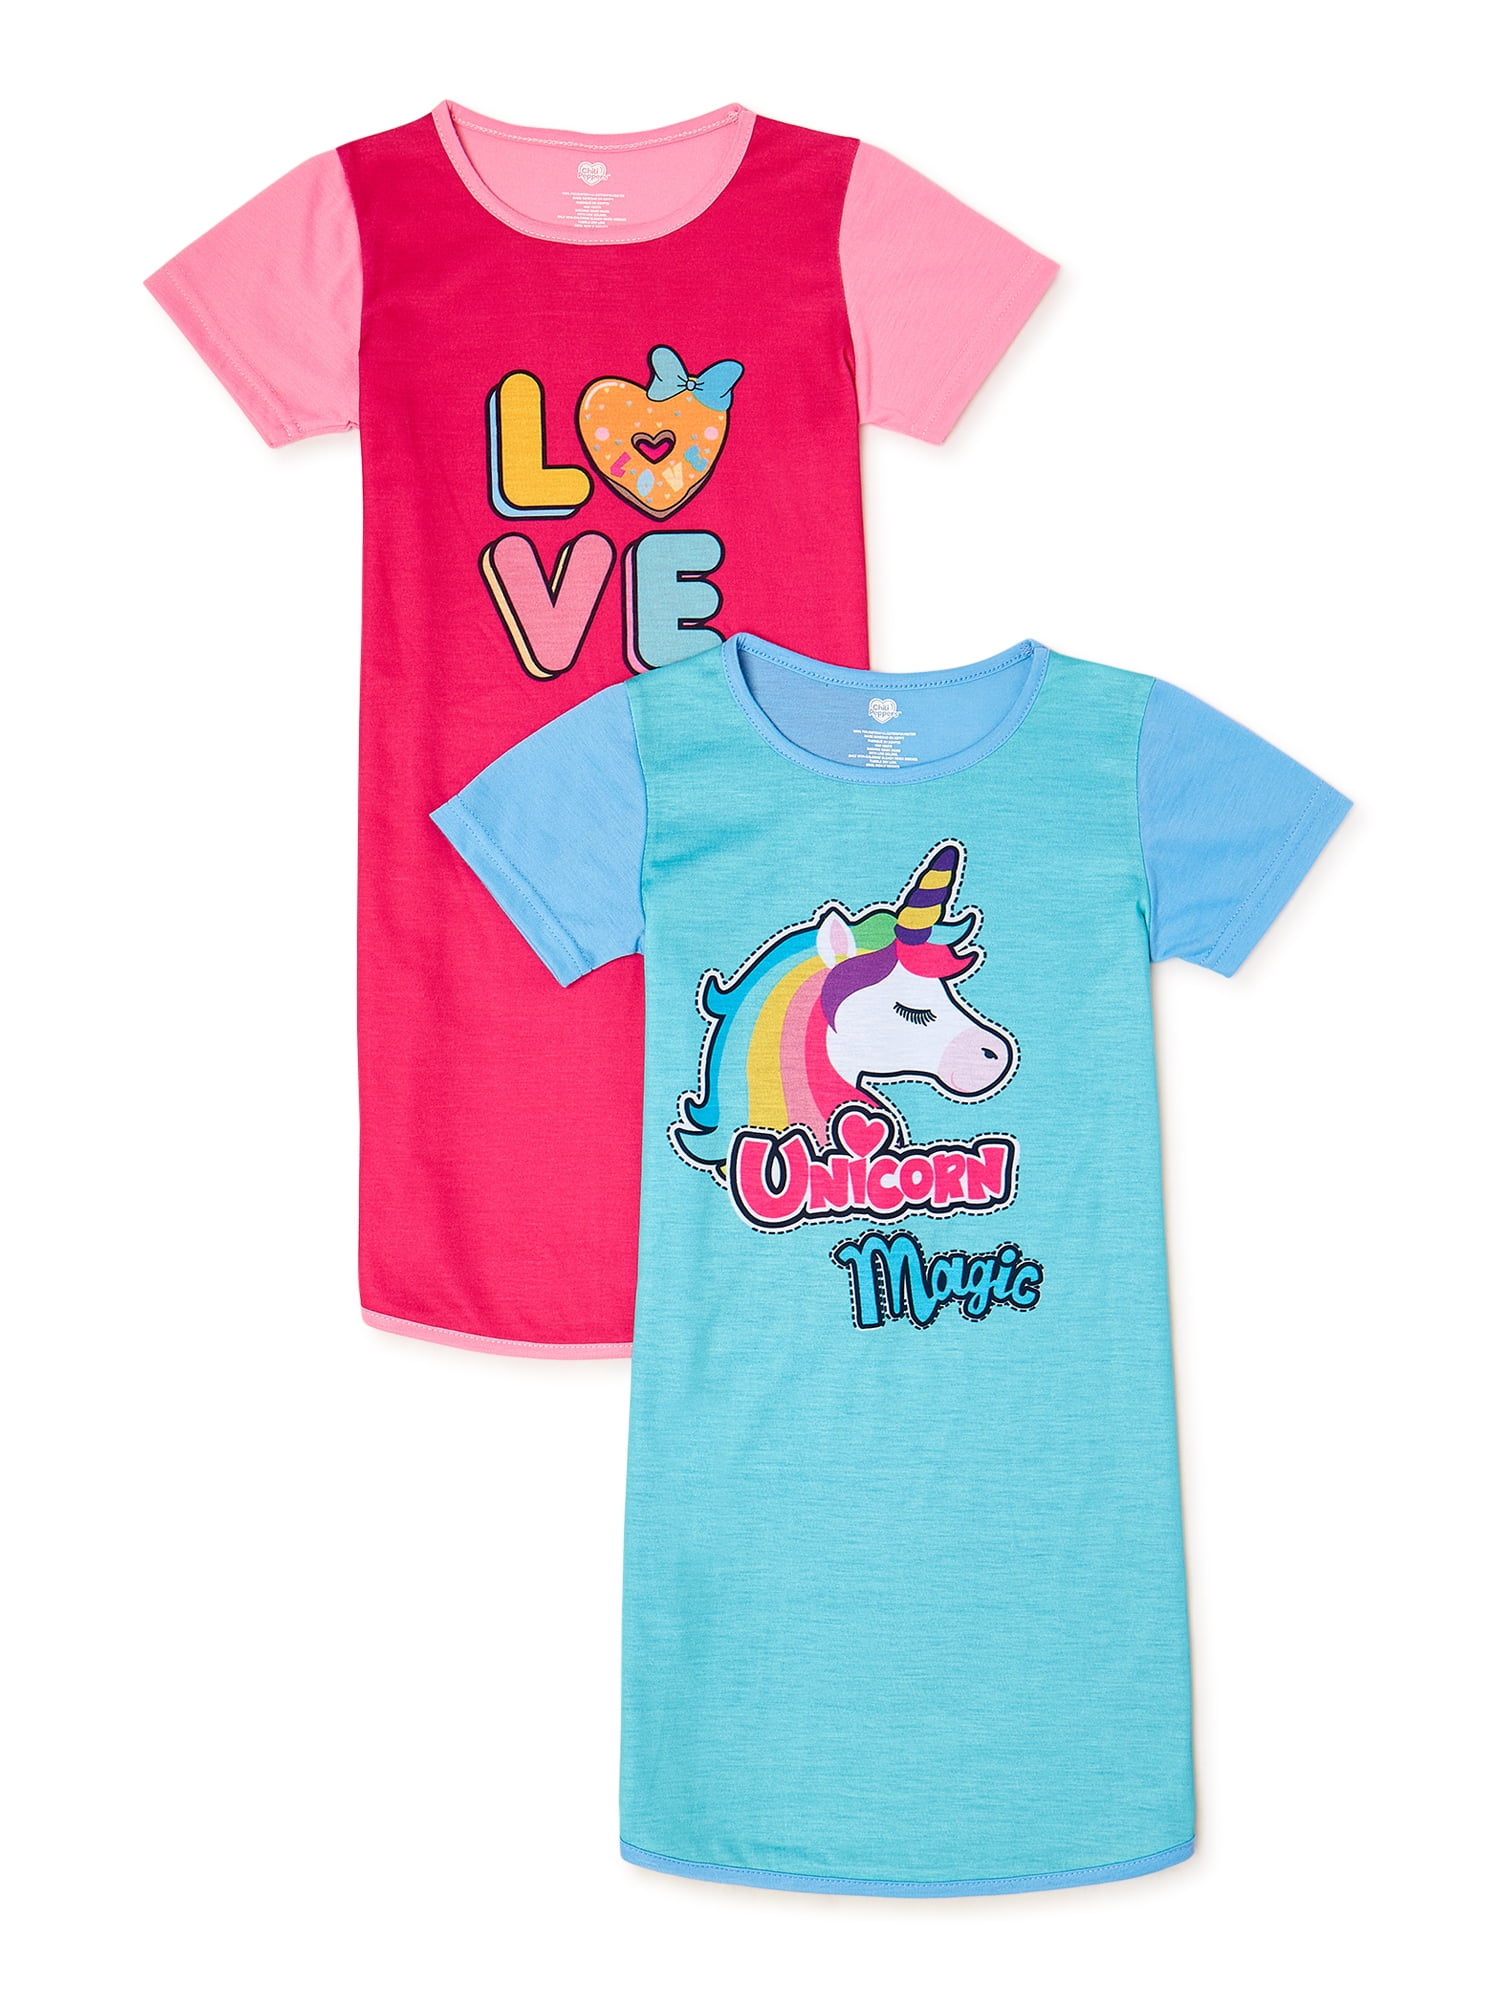 Details about   Cartoon Style Sister of Birthday Girl Shirt Kid Girls Boys Youth Top Tee T-Shirt 